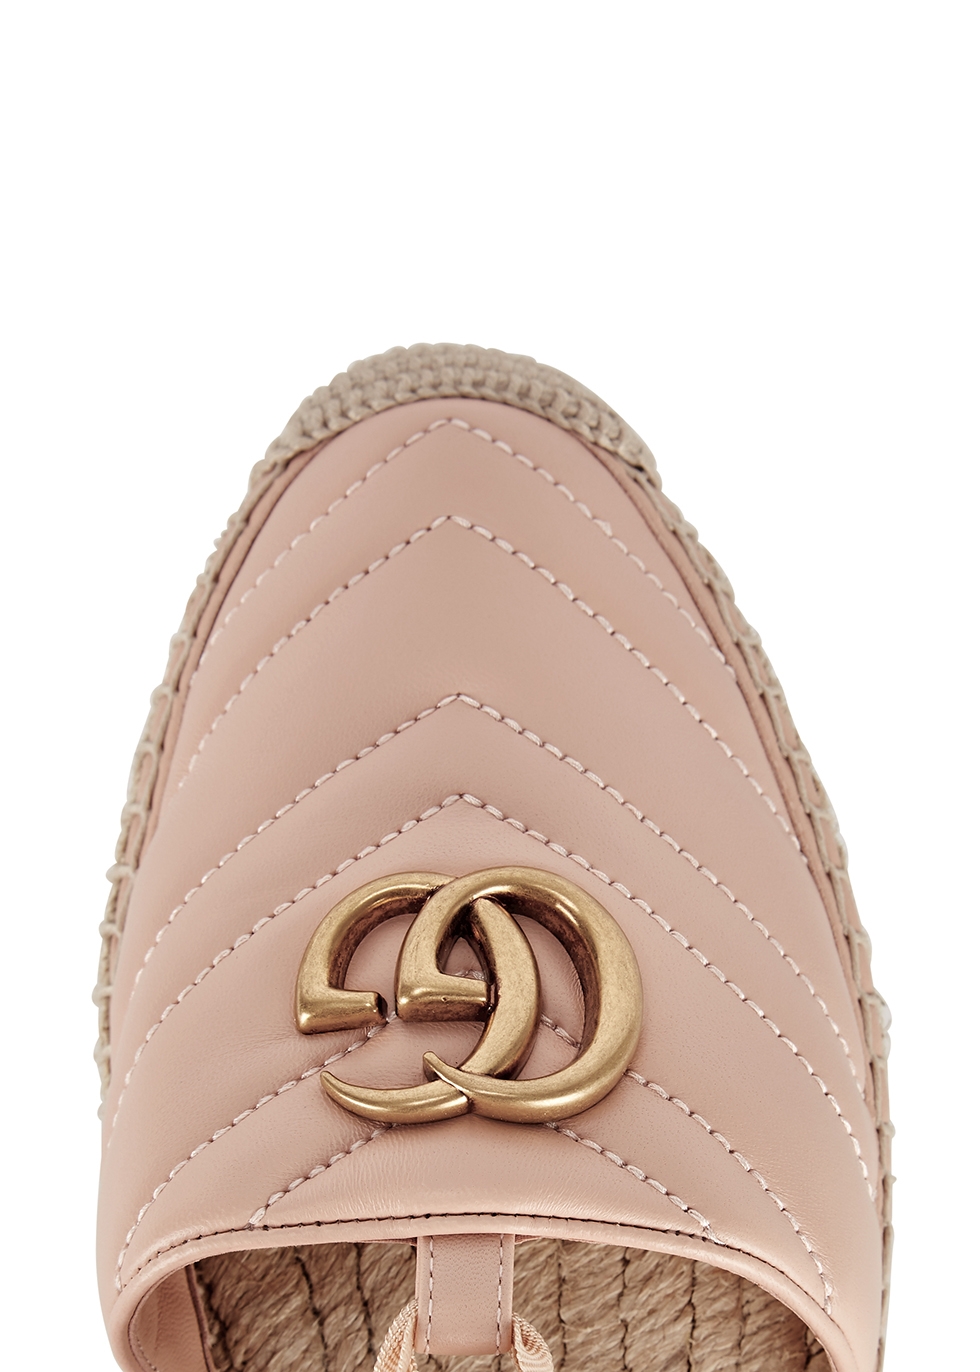 Gucci GG Marmont blush leather 